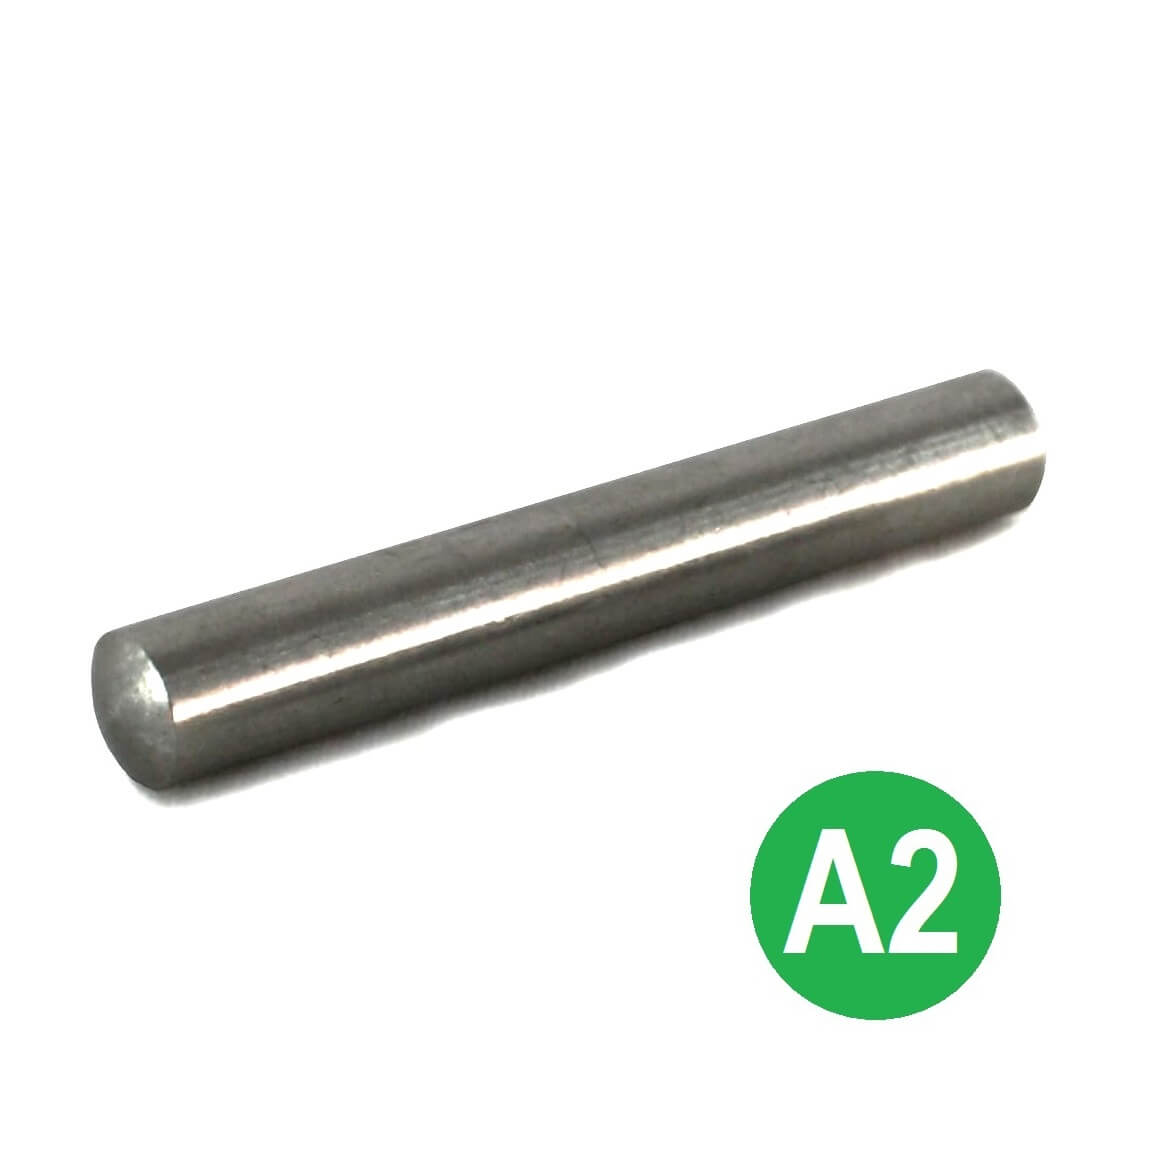 3mm Dia x 20mm A2 Stainless Dowel Pins DIN 7